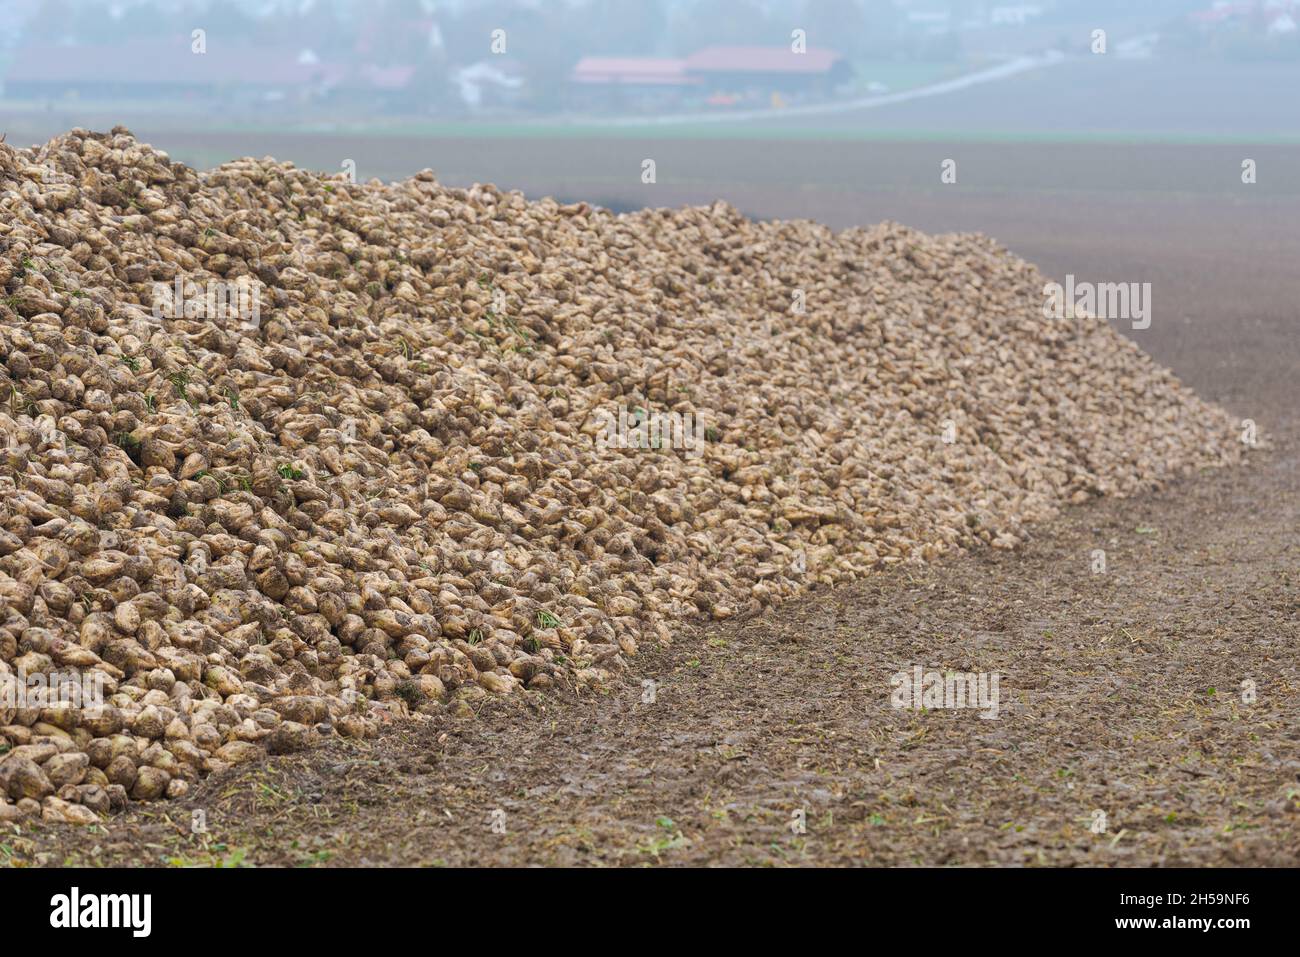 Long and high pile of freshly harvested sugar beet roots on field near village waiting for transport on dark moody overcast day in November Stock Photo